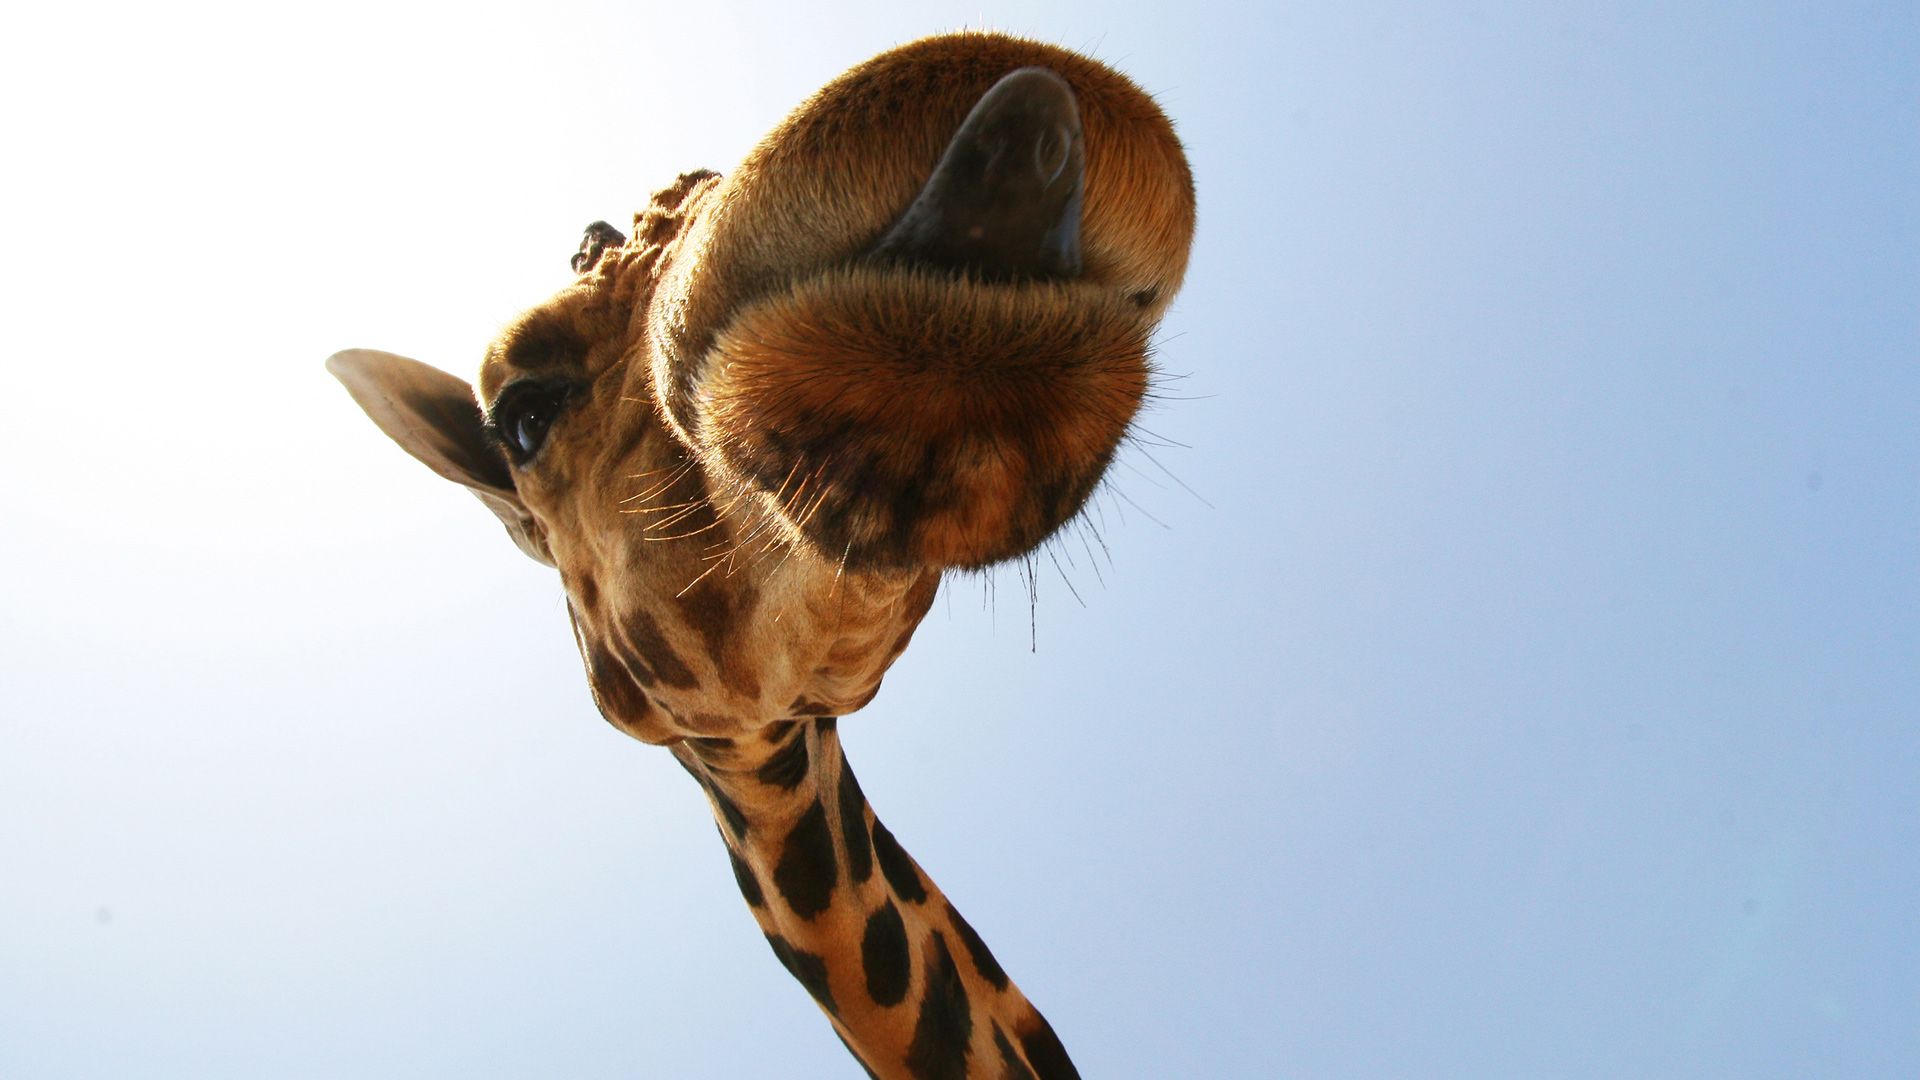 The Wallpapers Of Giraffes